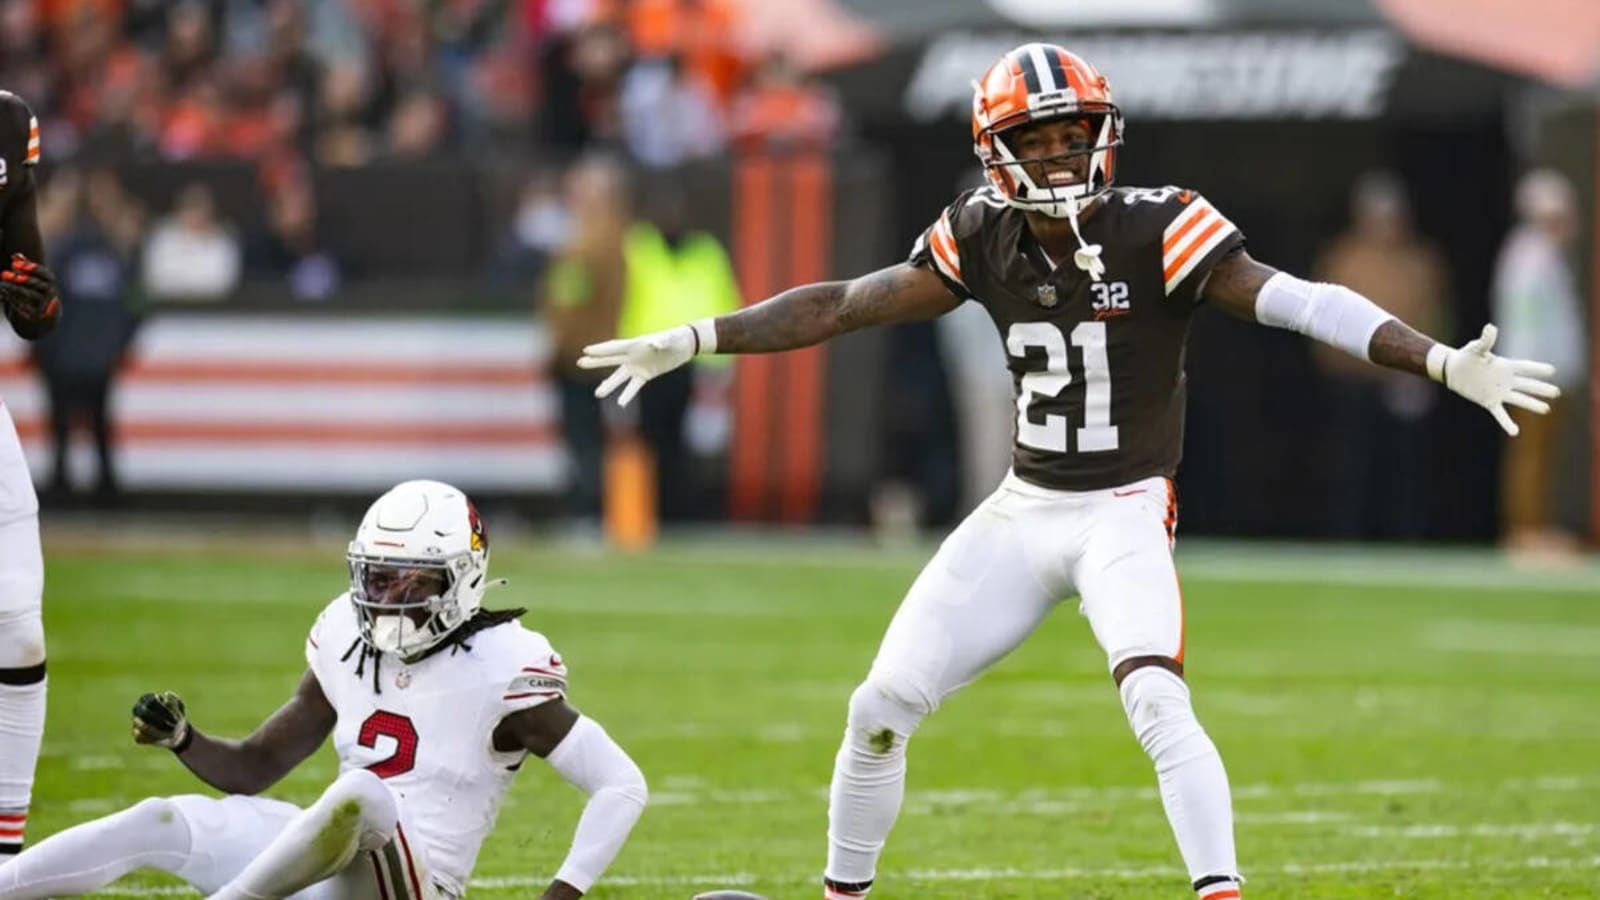 Browns CB Denzel Ward makes a bold statement on a key part of the team that helps them win